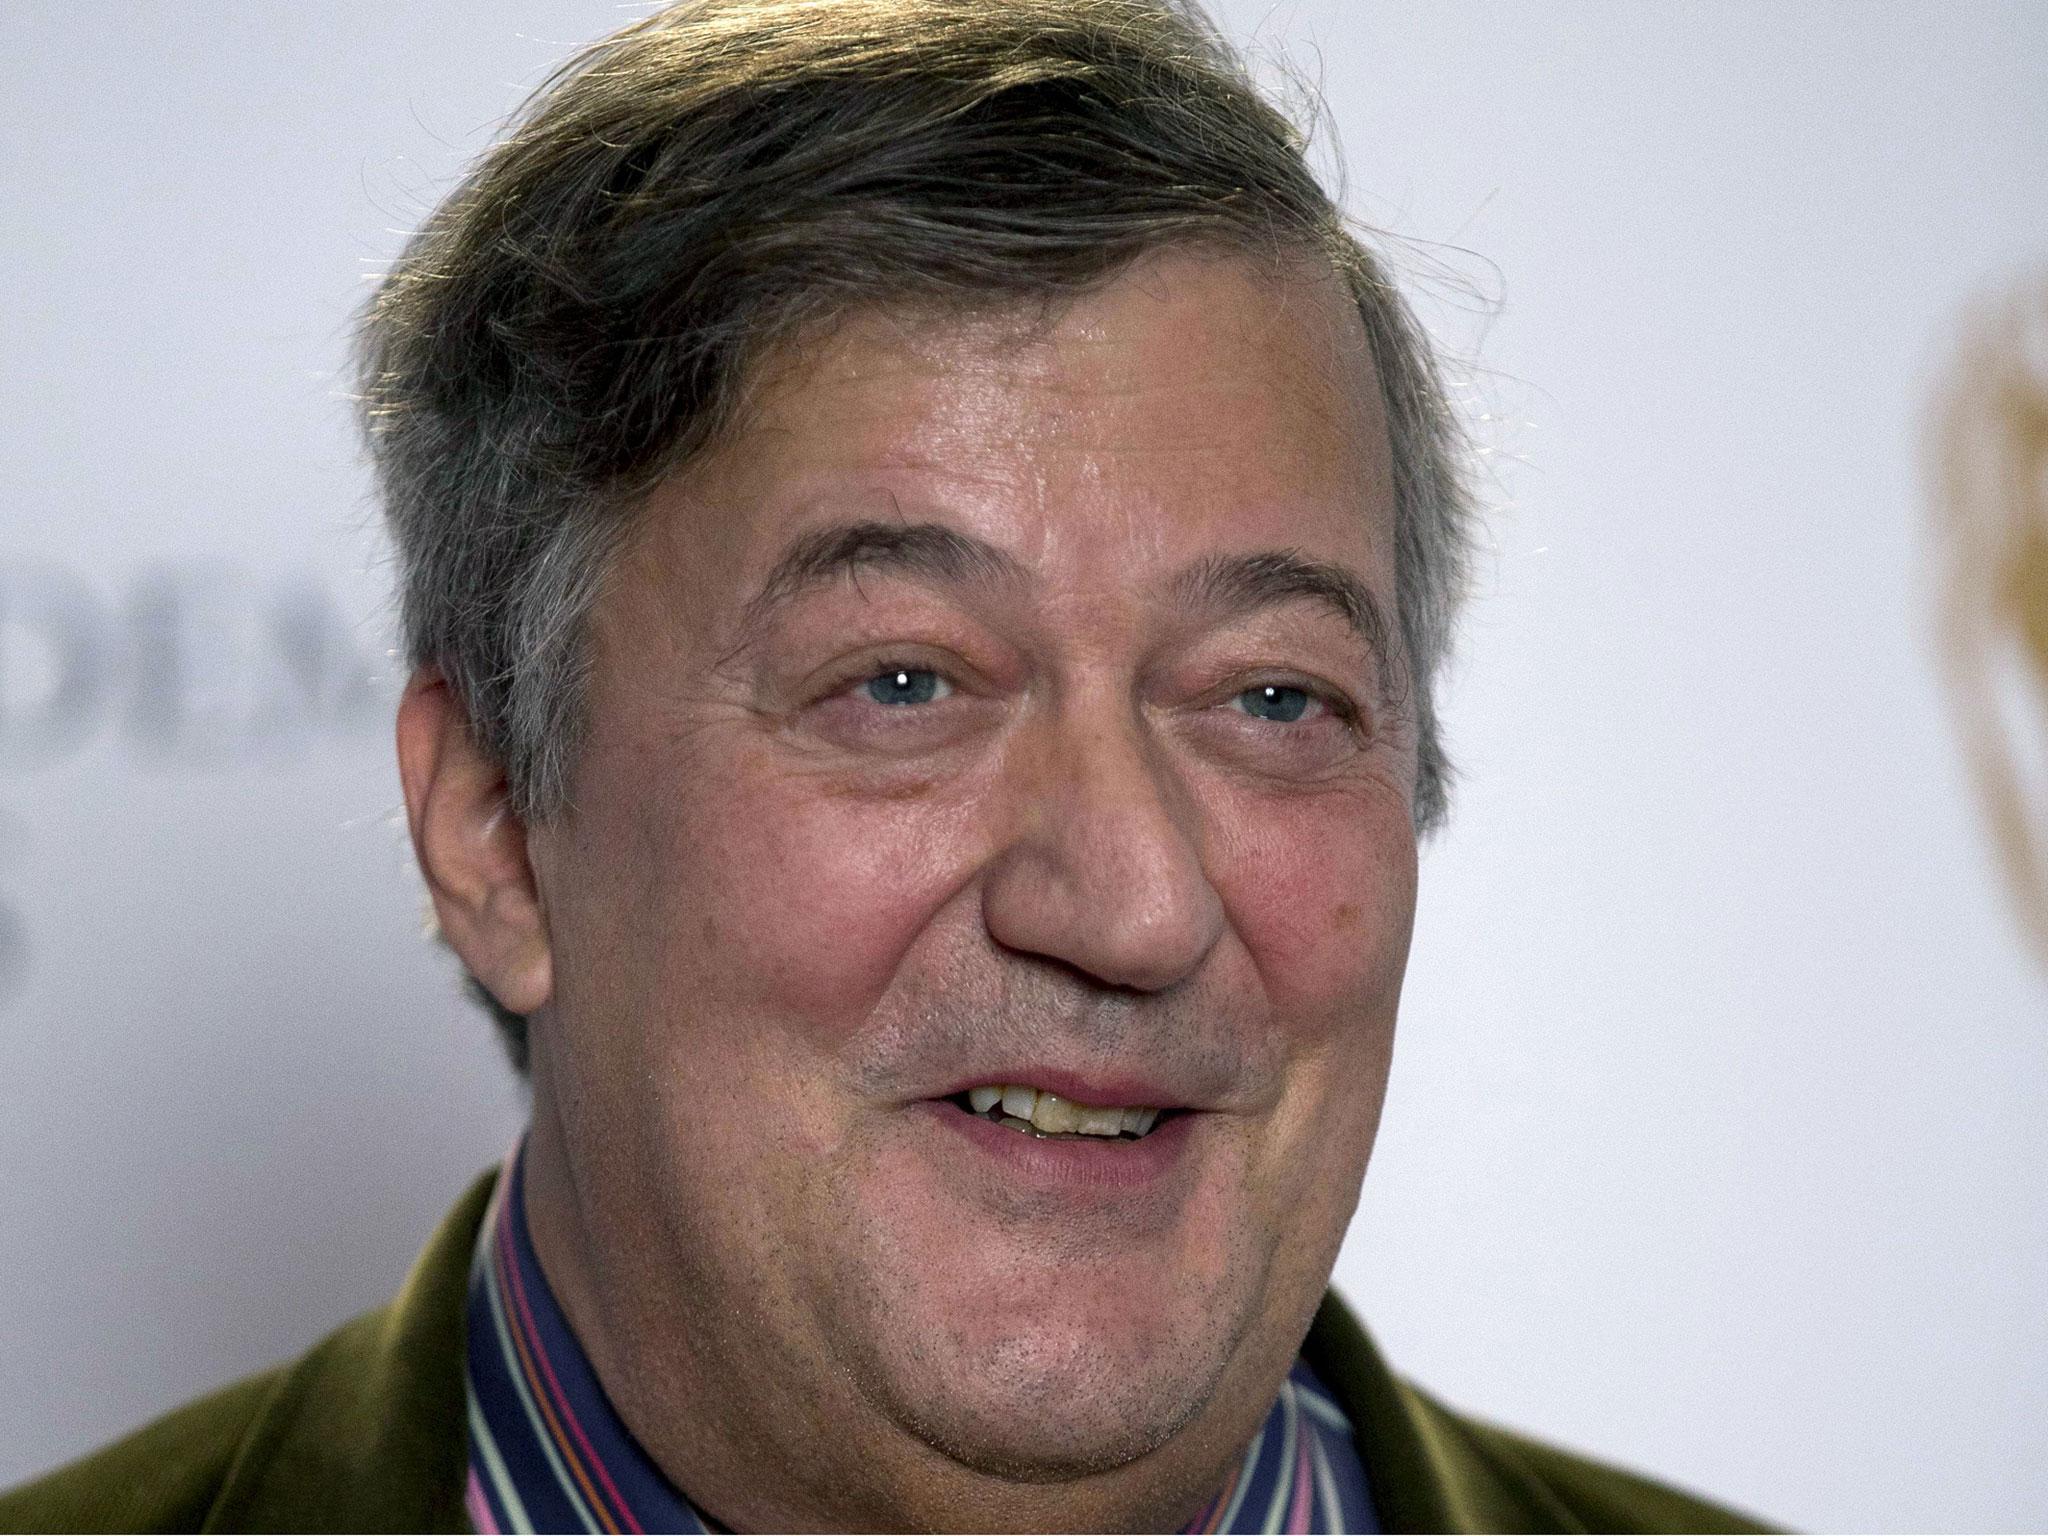 News of the investigation into Stephen Fry brought to light the existence of blasphemy laws in New Zealand